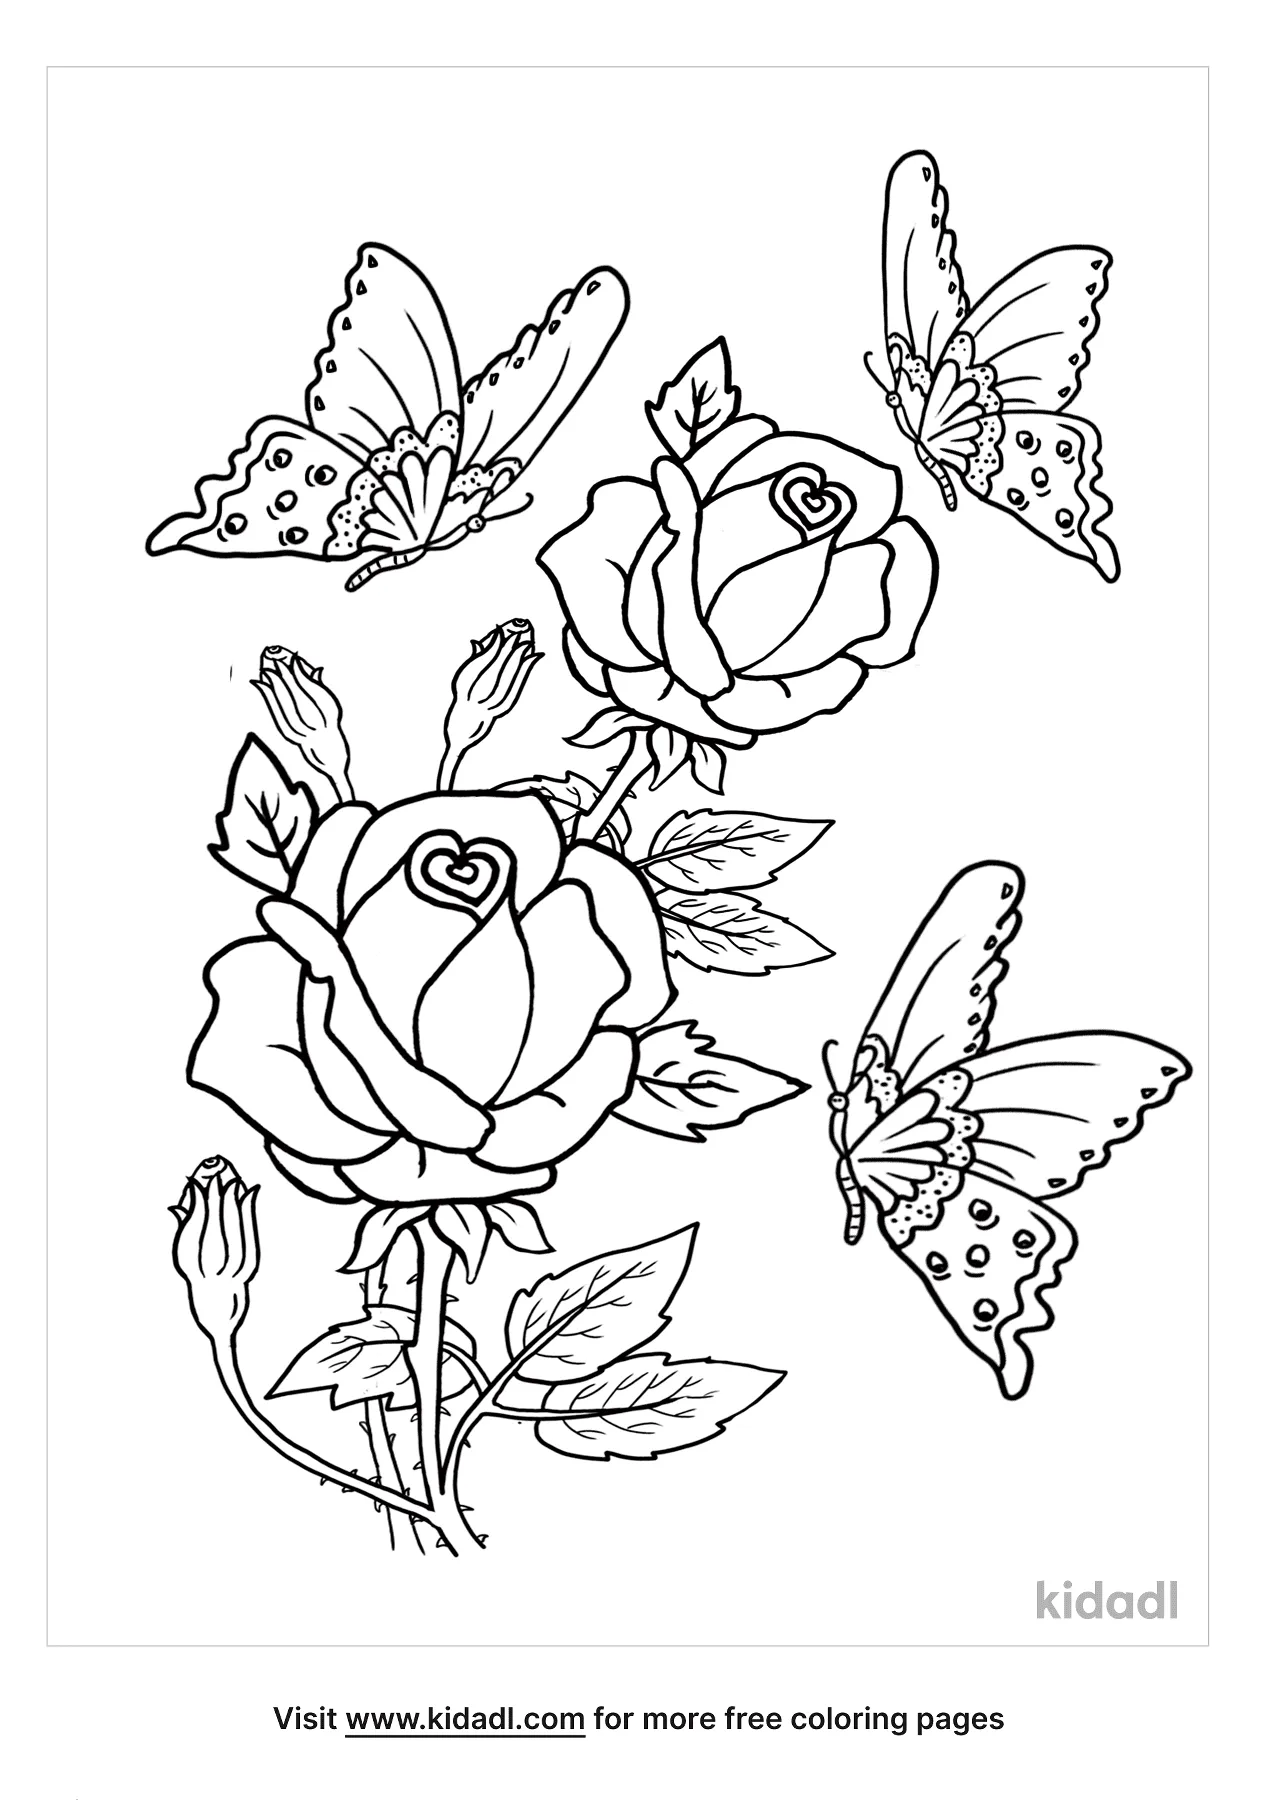 Flowers And Butterflies Coloring Page   Free Flowers Coloring Page ...